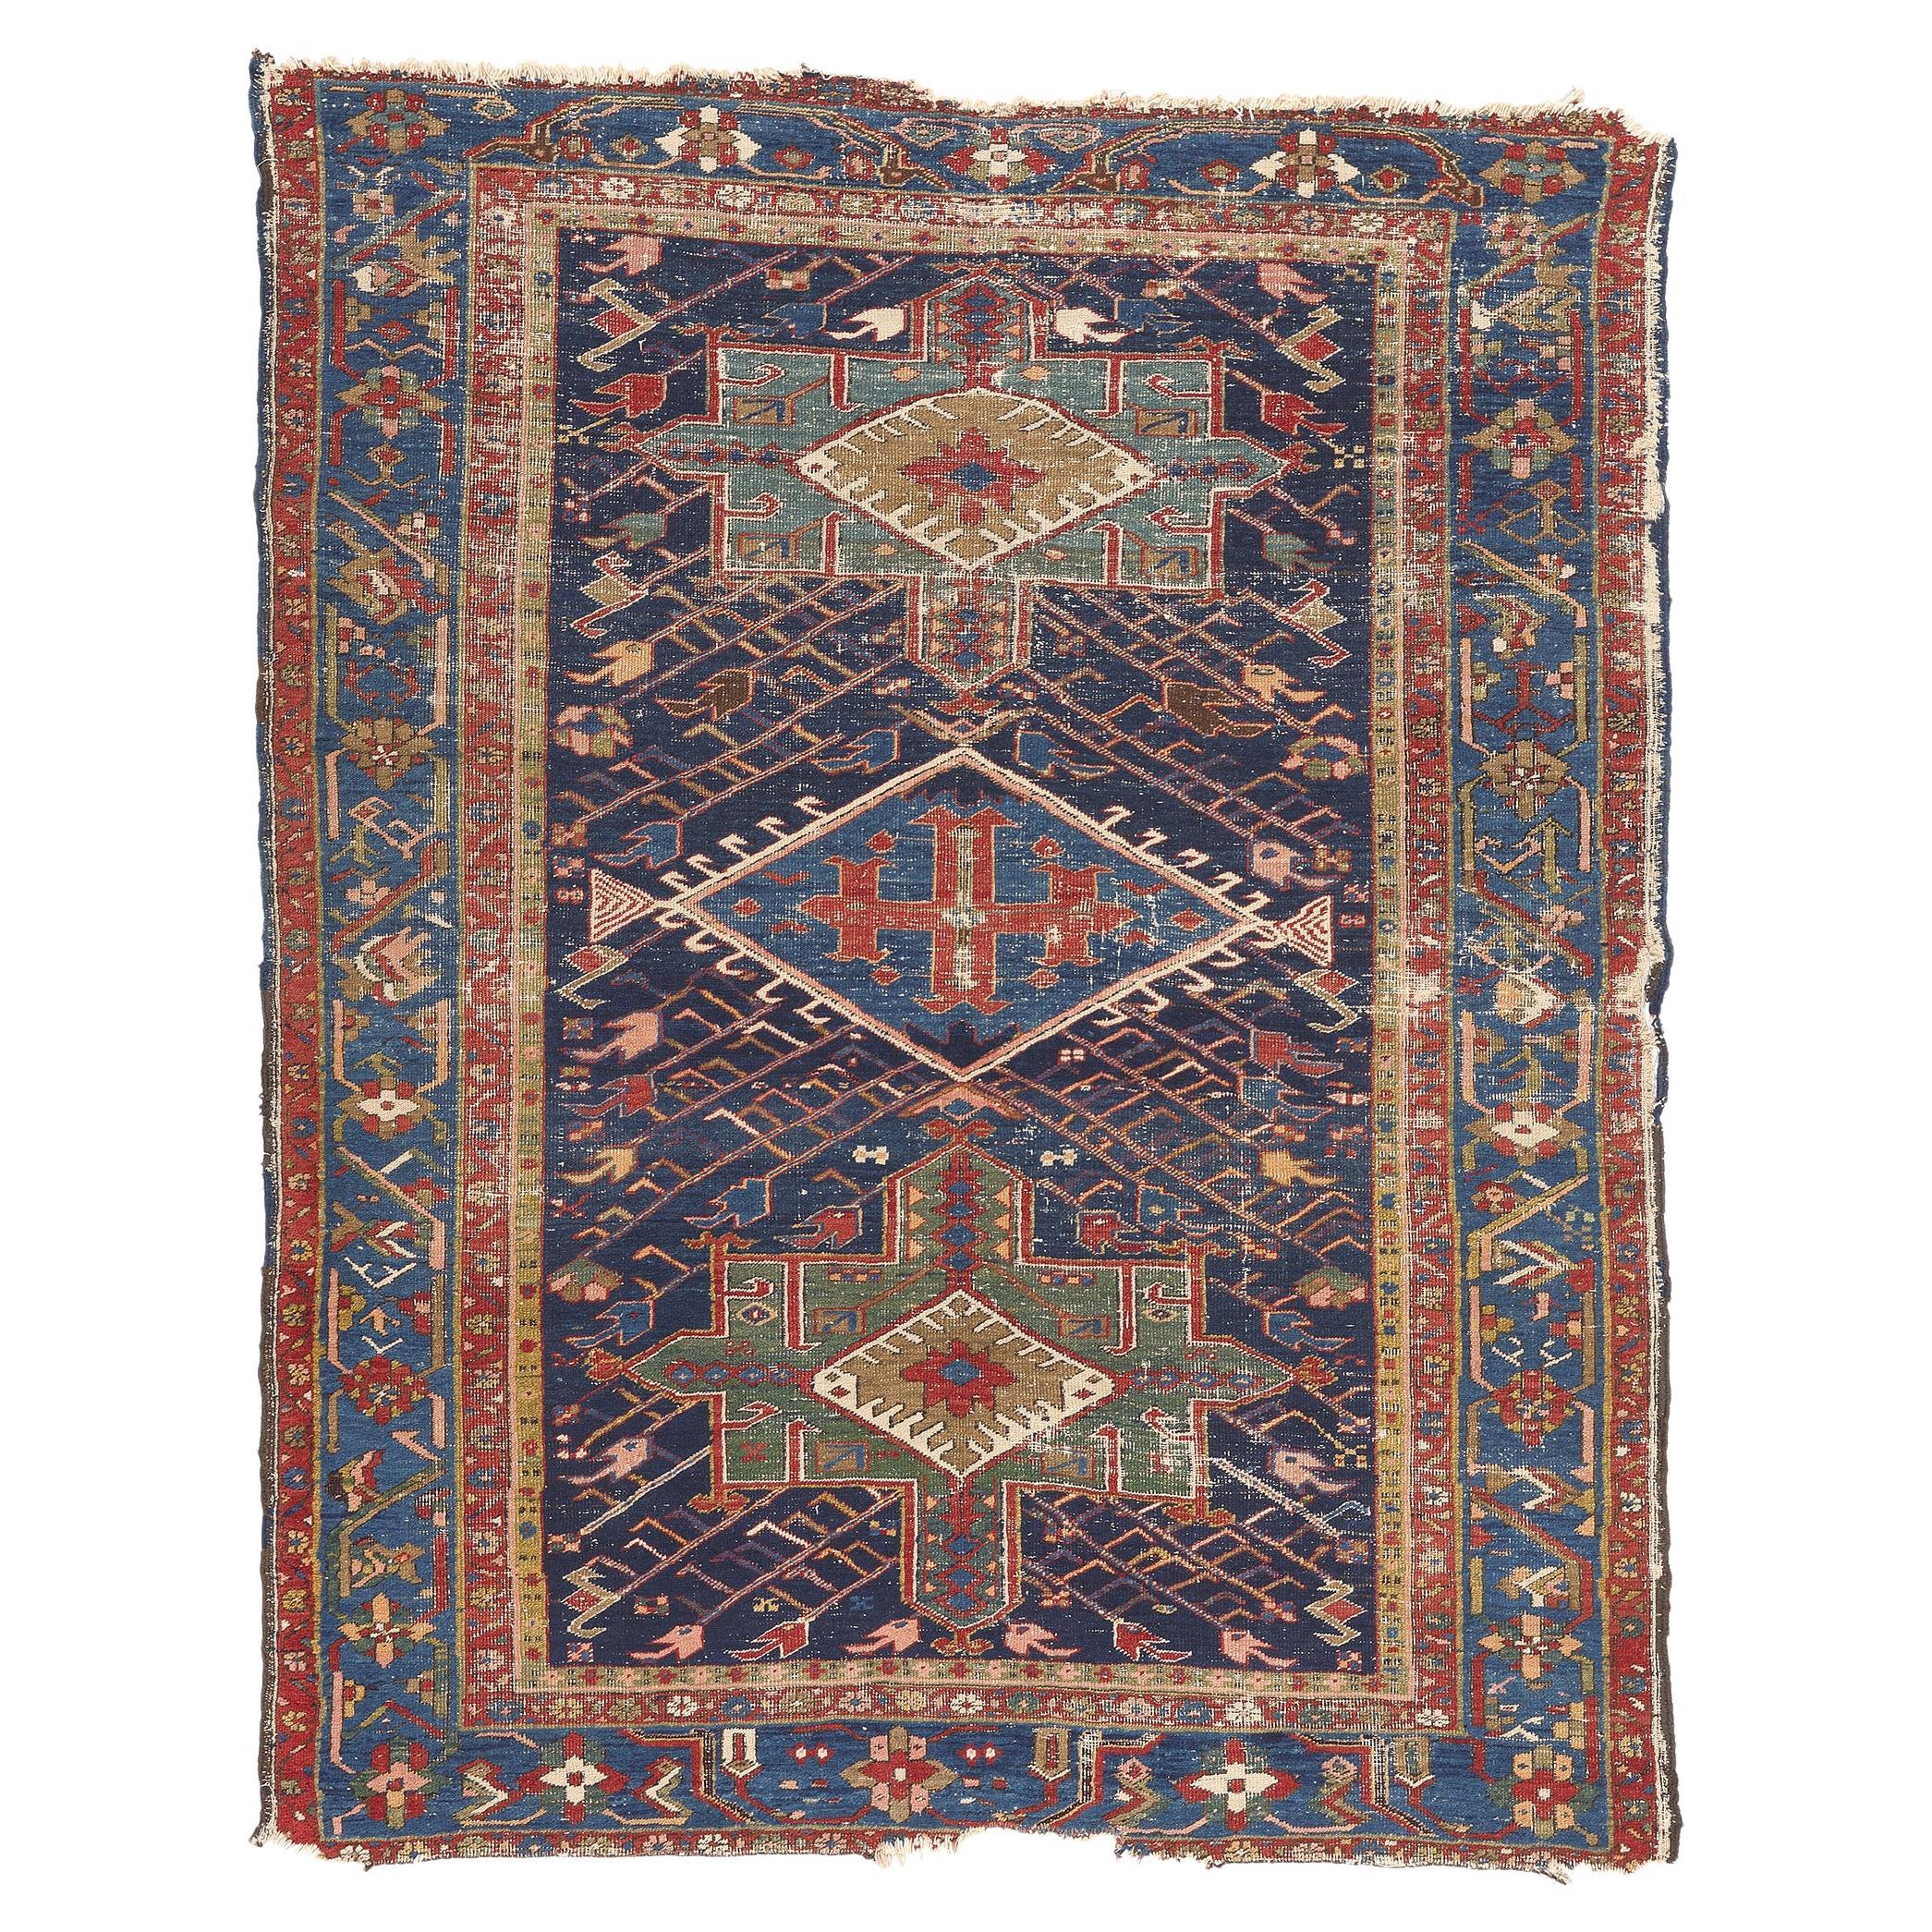 Antique Worn Persian Serapi Rug, Rugged Beauty Meets Modern Masculine For Sale